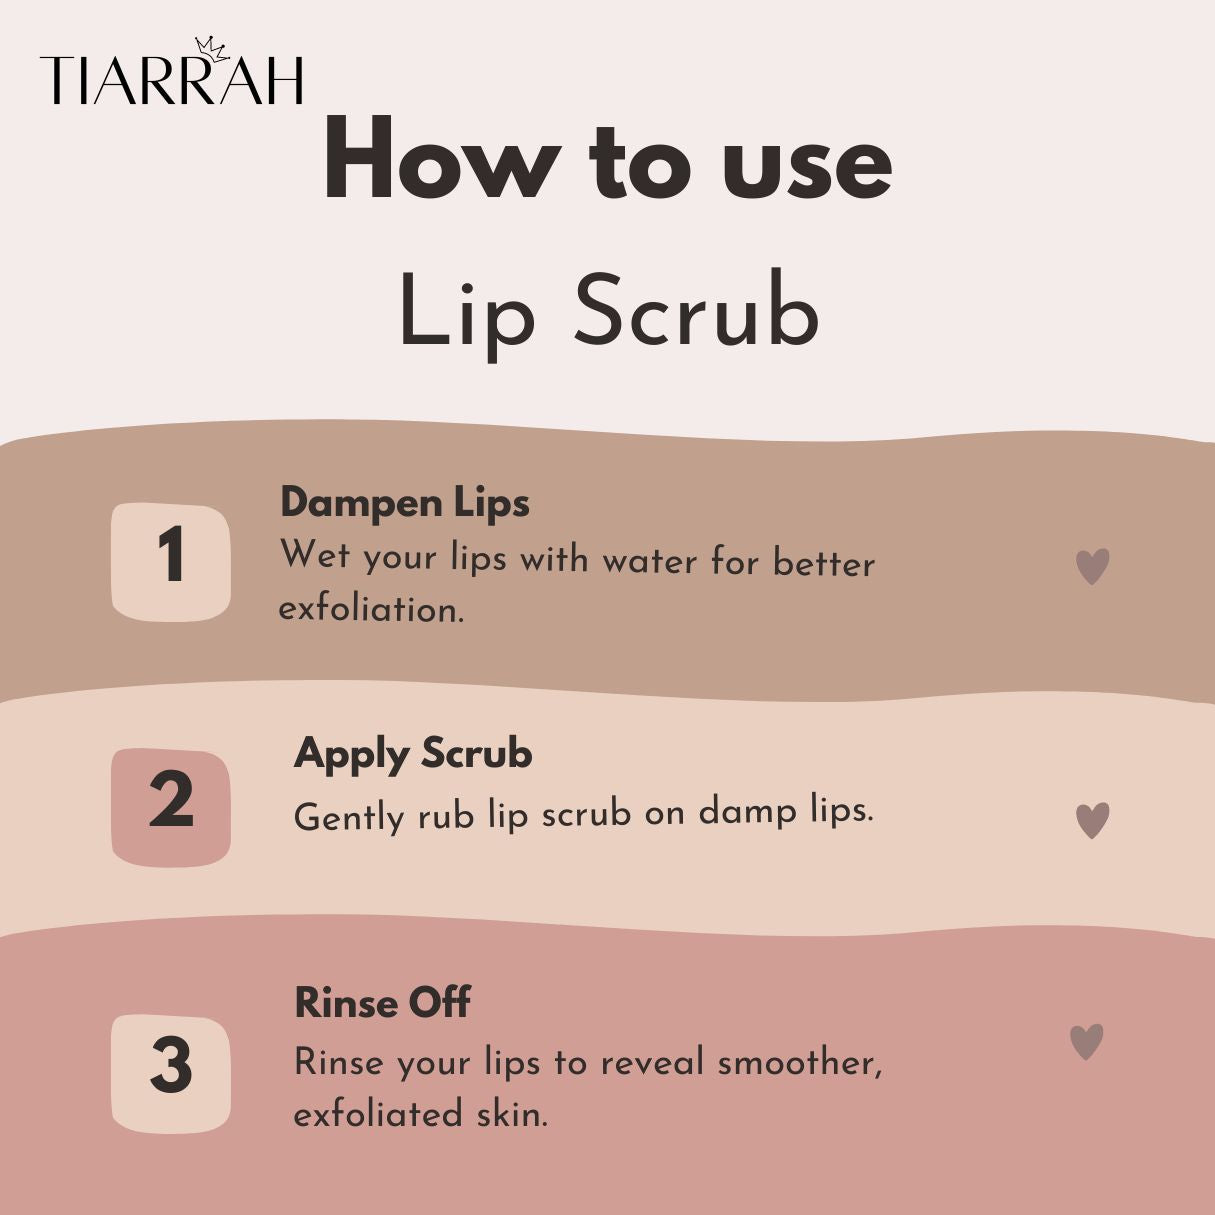 Organic Smoggy Citrus Lip Scrub from Tiarrah - The Luxury Bath and Body Care Shop